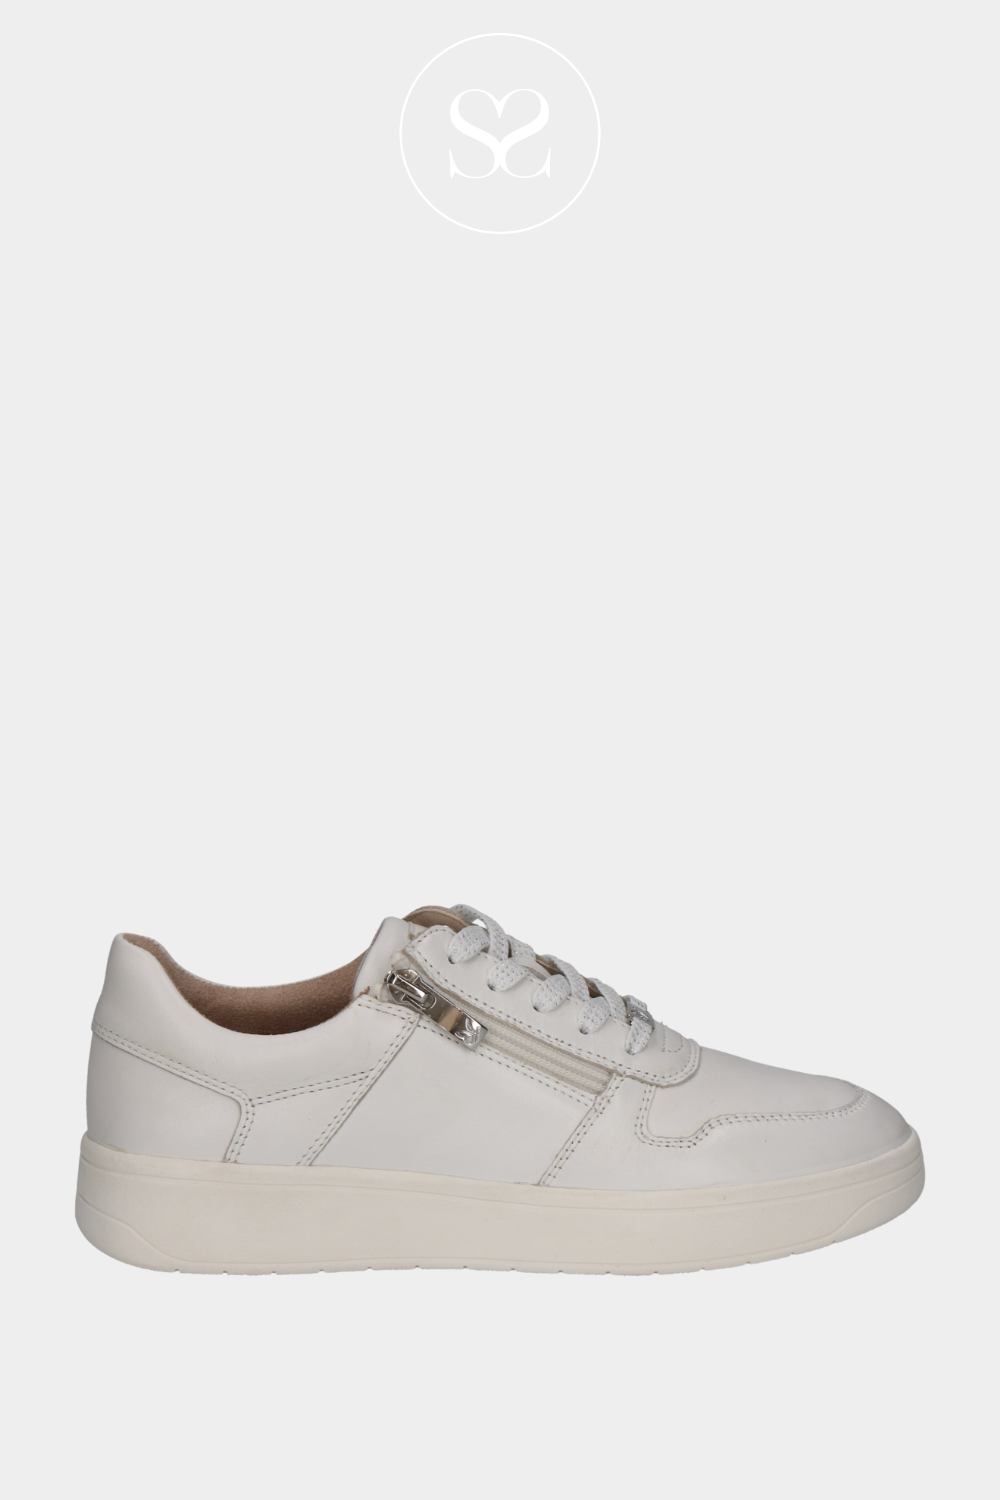 CAPRICE 9-23301-42 WHITE LEATHER TRAINER WITH ZIP AND LACE FASTENING. SIMPLE AND VERSTAILE WALKING TRAINERS